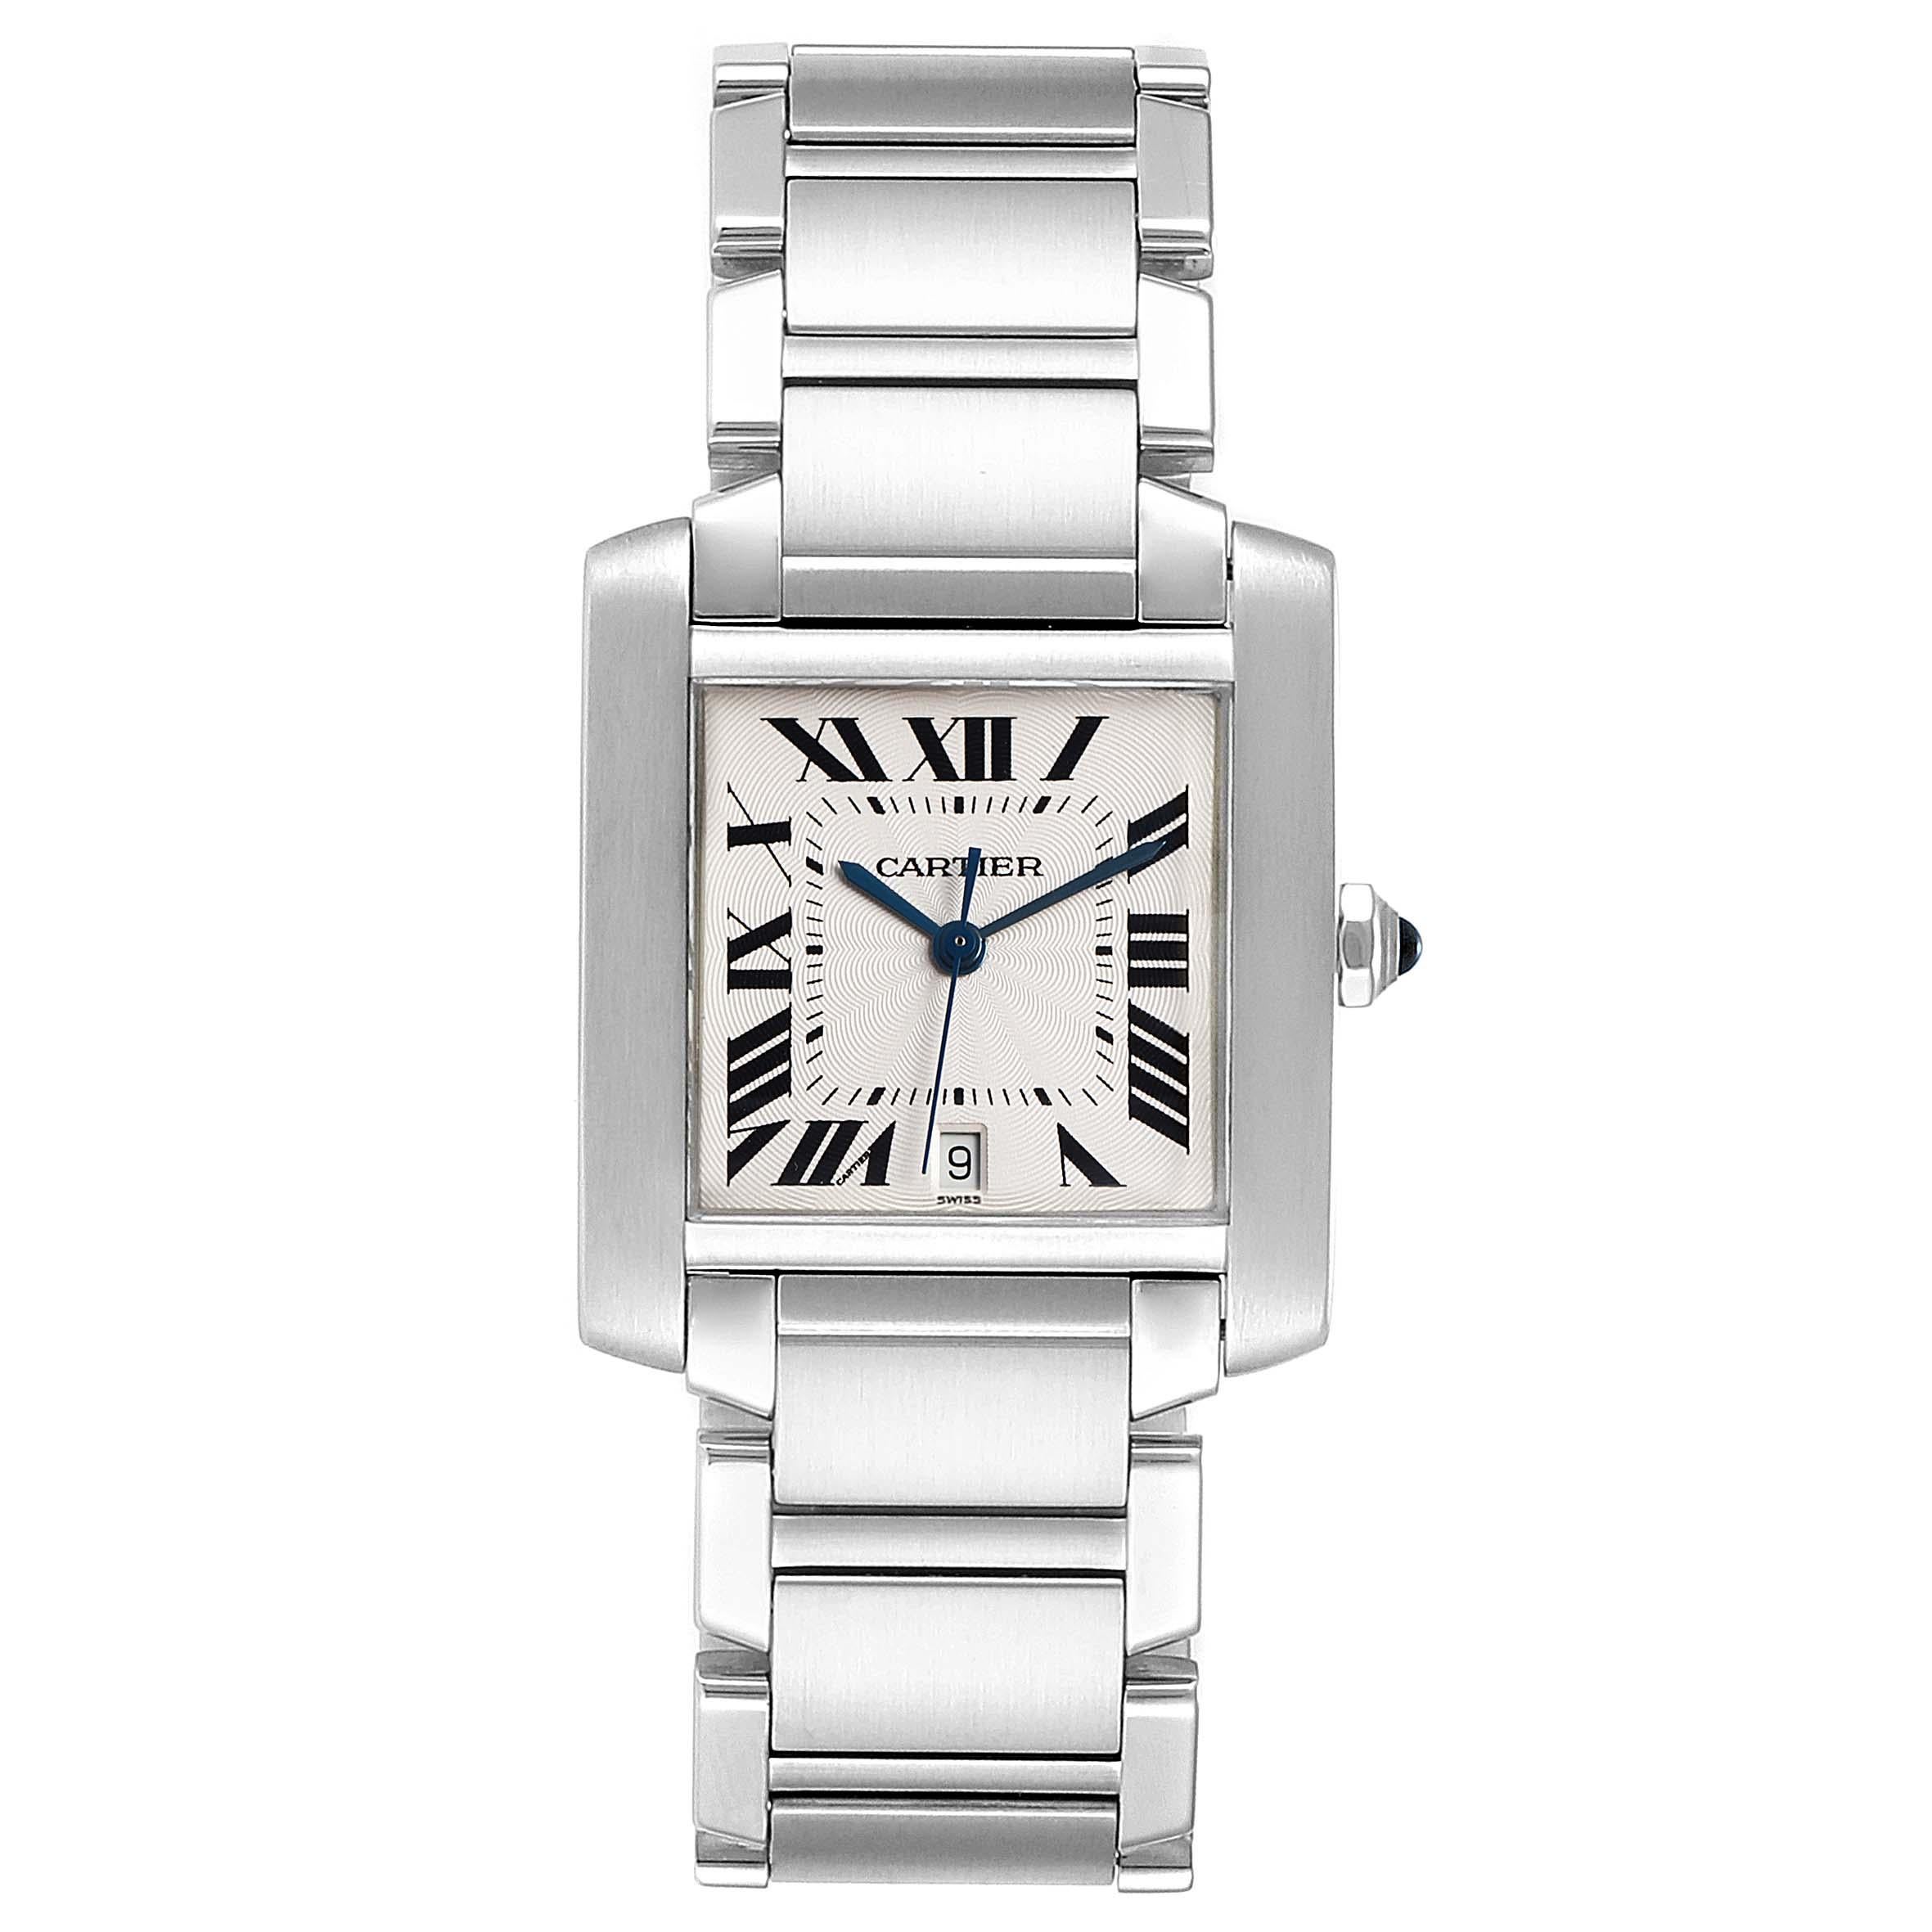 Cartier Tank Francaise Large Steel Automatic Mens Watch W51002Q3. Automatic self-winding movement. Rectangular stainless steel 28.0 x 32.0 mm case. Octagonal crown set with a blue spinel cabochon. . Scratch resistant sapphire crystal. Silver